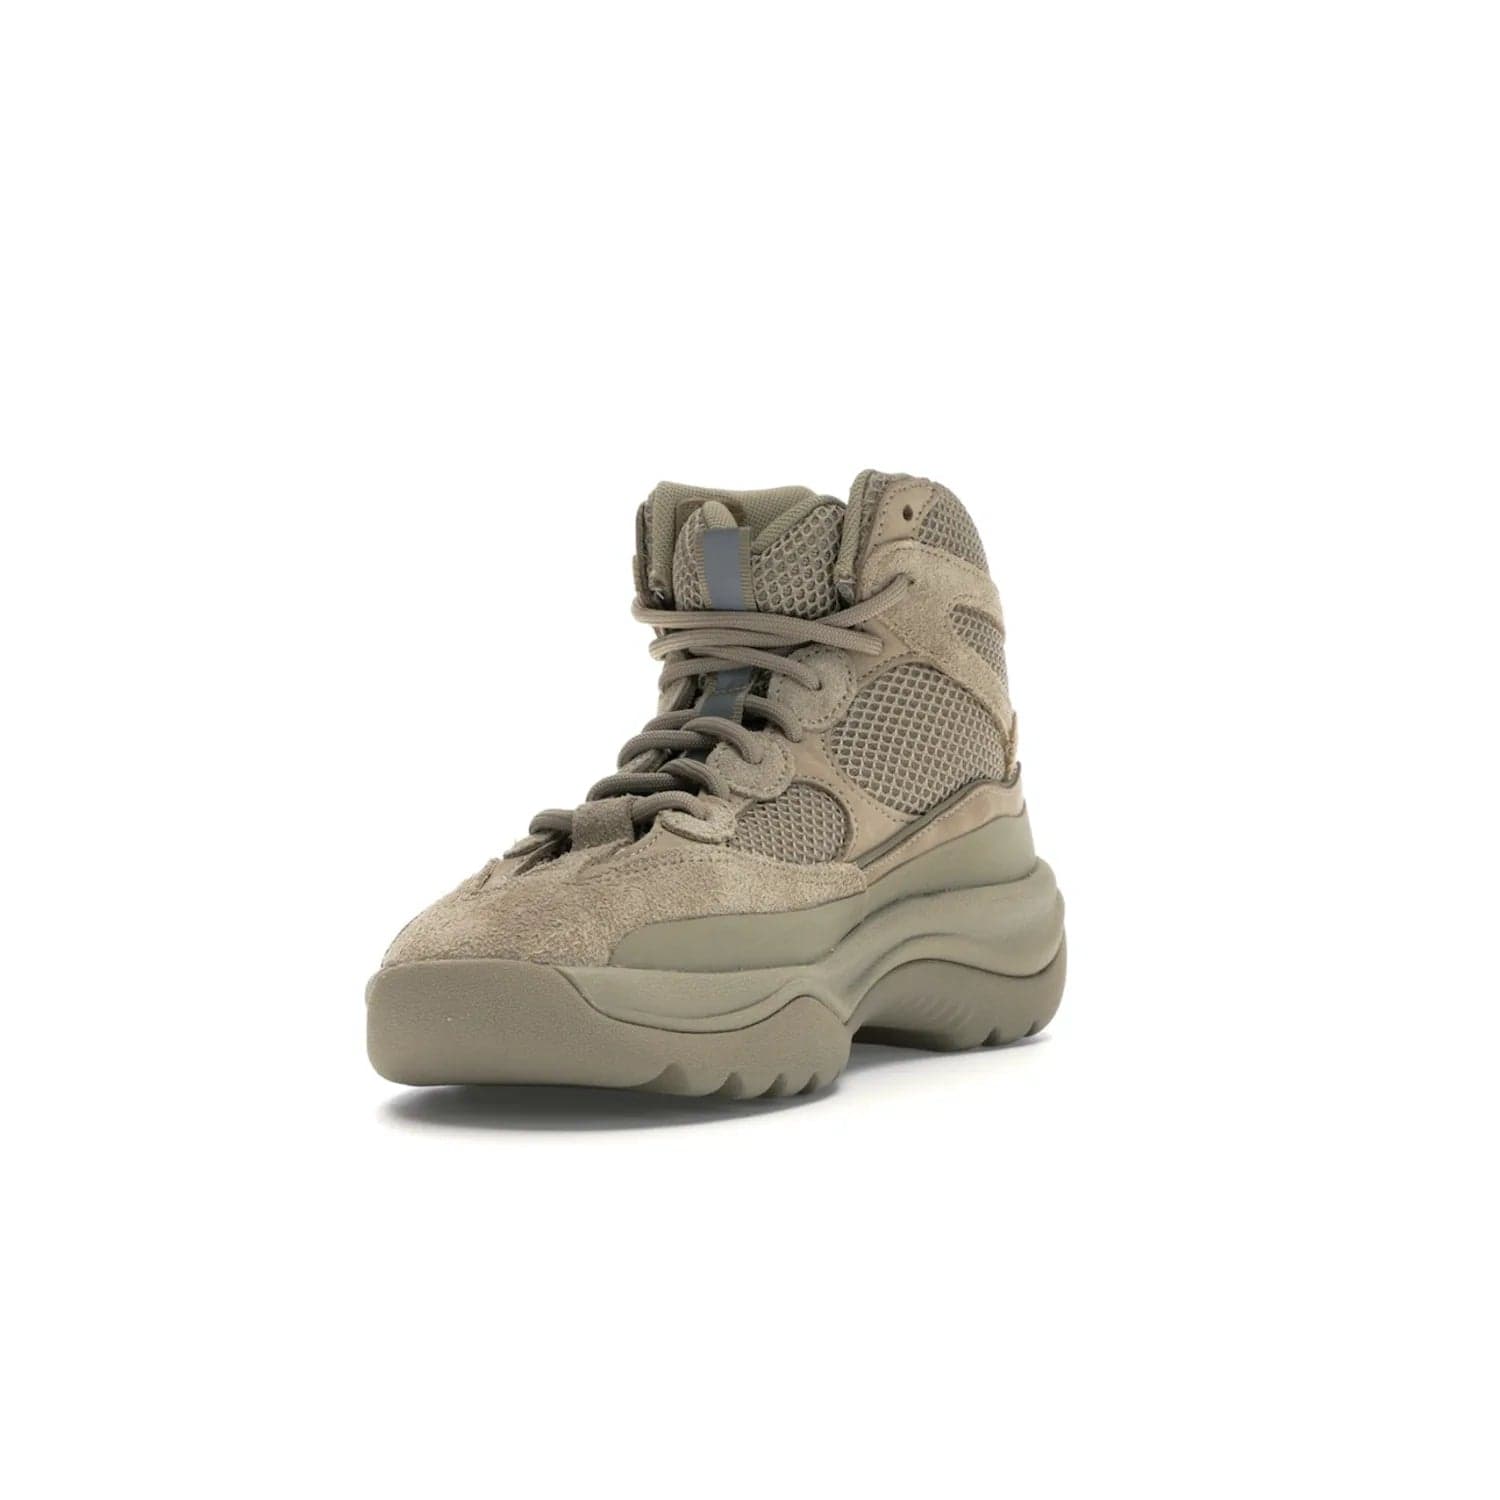 adidas Yeezy Desert Boot Rock - Image 13 - Only at www.BallersClubKickz.com - #
This season, make a fashion statement with the adidas Yeezy Desert Boot Rock. Nubuck and suede upper offers tonal style while the grooved sole provides traction and stability. Get yours in April 2019.